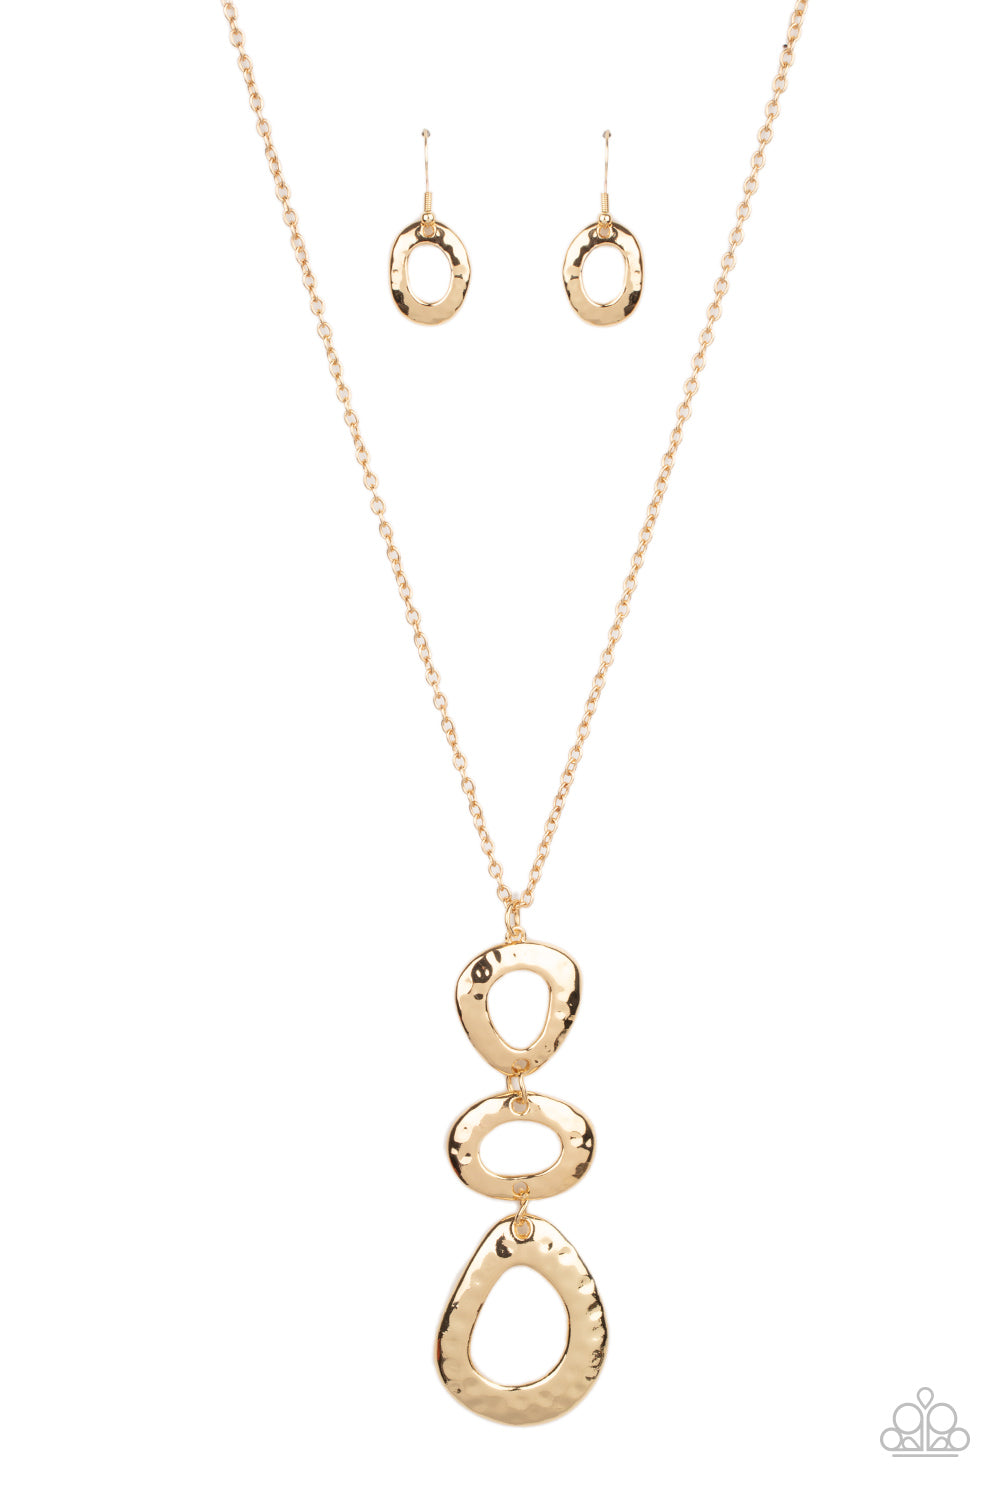 Gallery Artisan Gold-Necklace